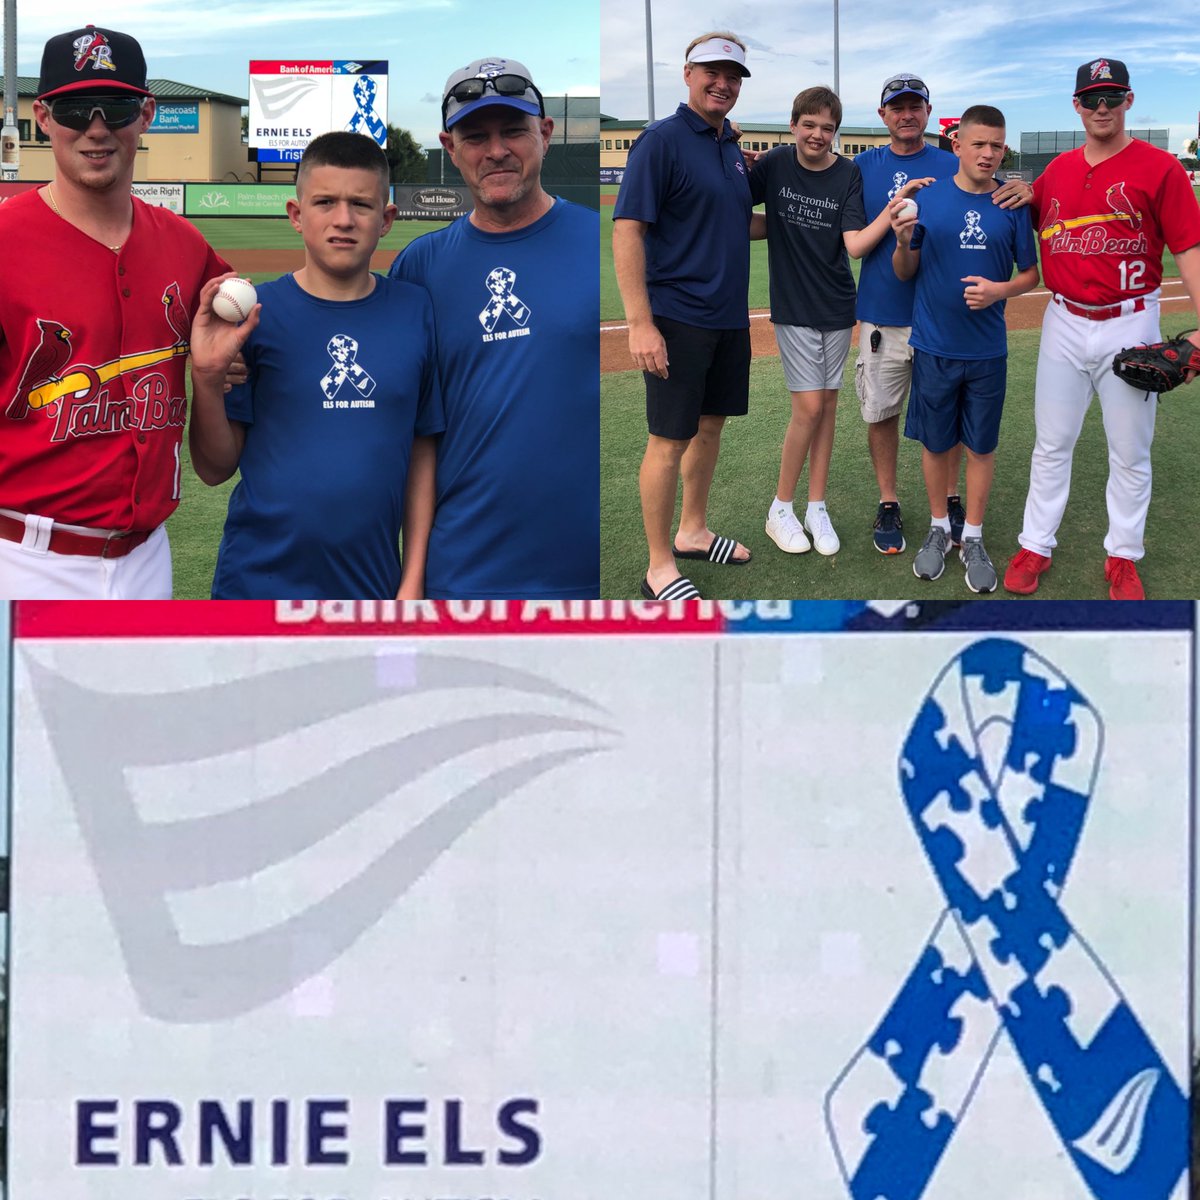 You never know who you’ll see at a ⁦@GoPBCardinals⁩ game! Golf ⛳️ pro Ernie Els (⁦⁦@ErnieEls_Golf⁩) joined our 1st pitches tonight for ⁦@ElsForAutism⁩ nite ⁦@RDCstadium⁩